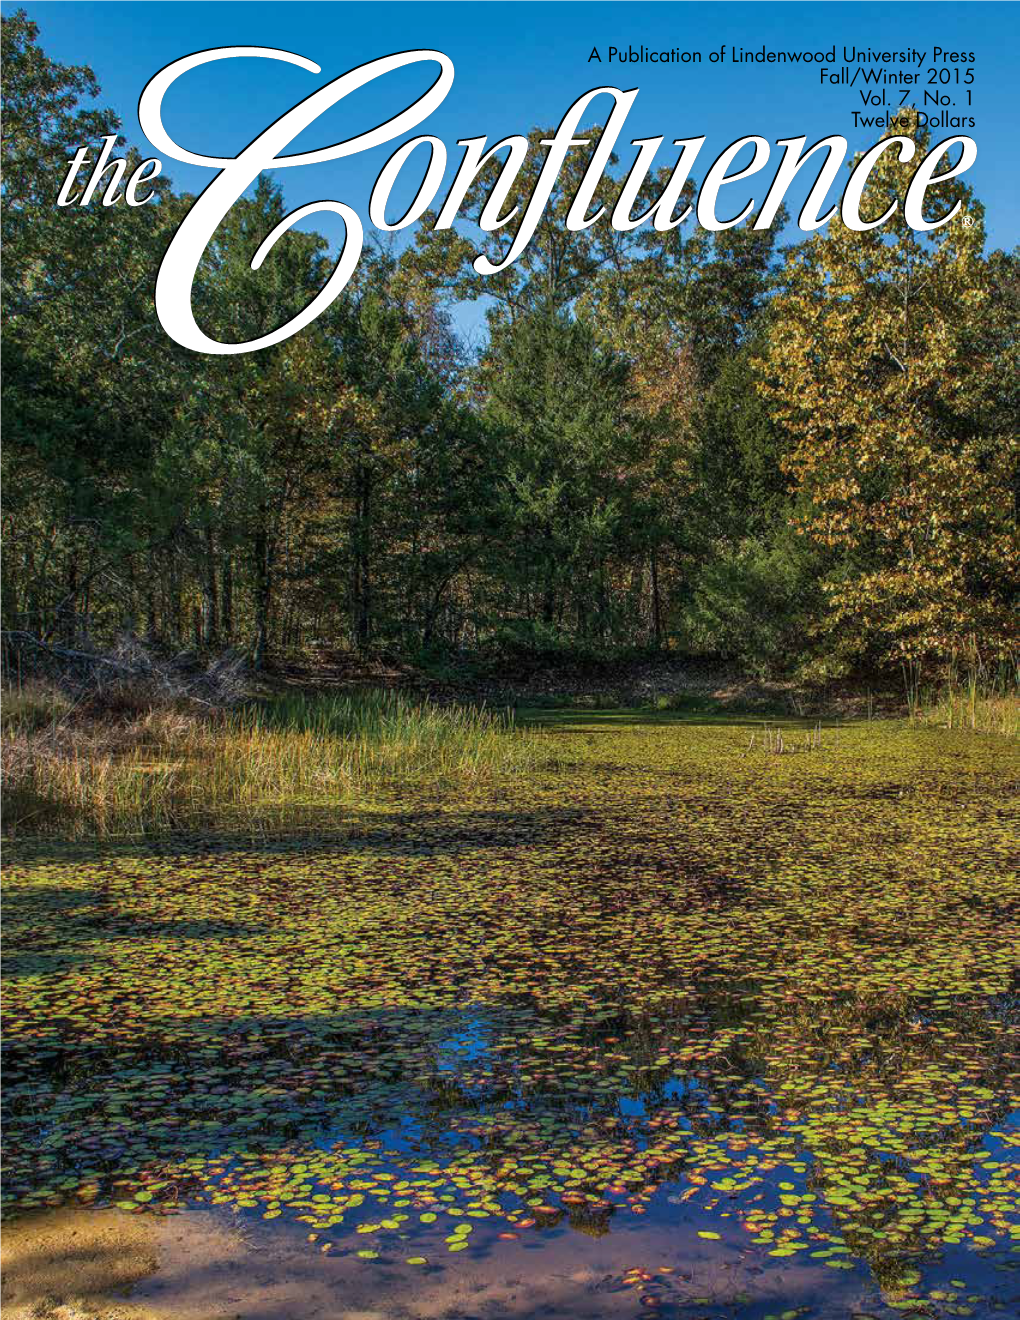 The Confluence -Fall/Winter 2015